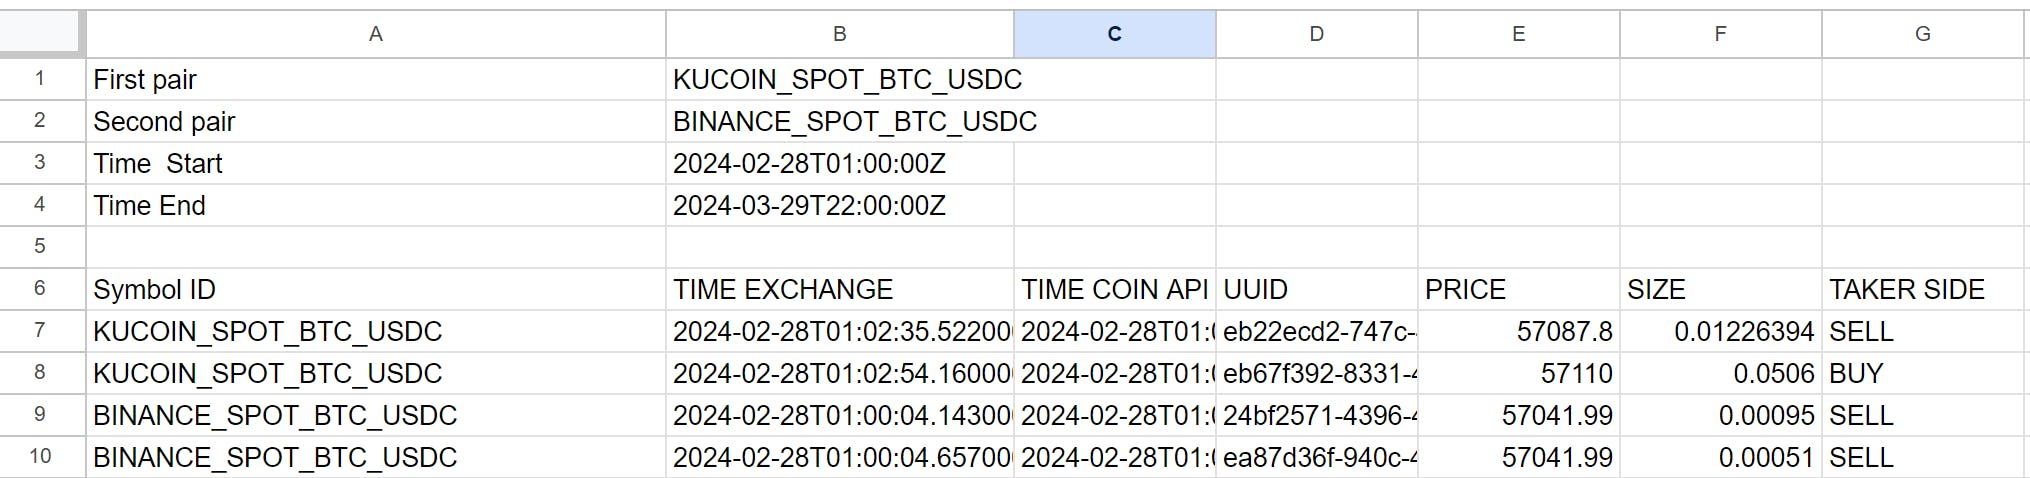 Searching for information about prices in different exchanges